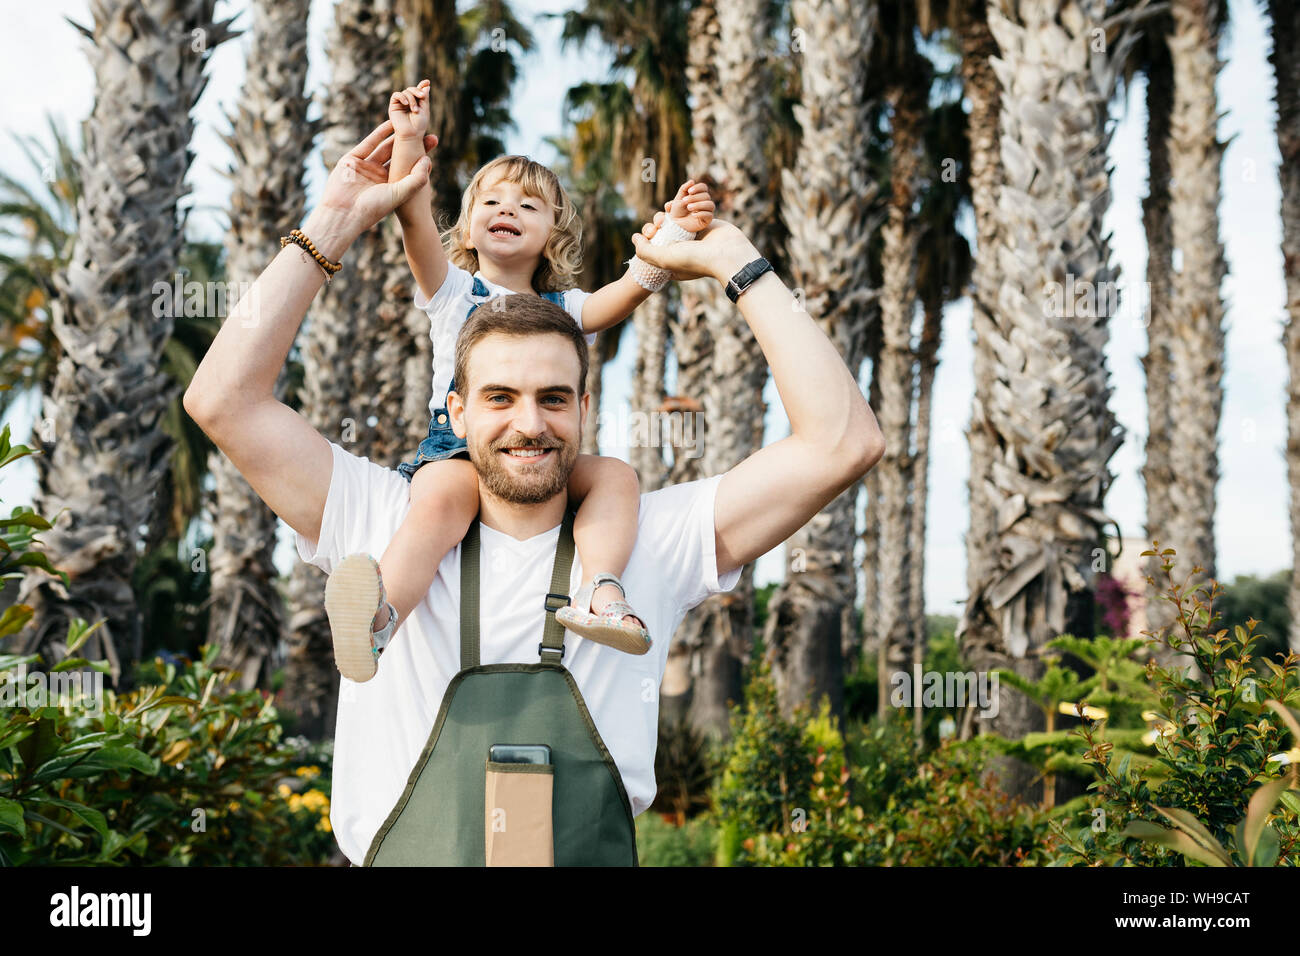 Portrait of a happy worker of a garden center with a girl on his shoulders Stock Photo